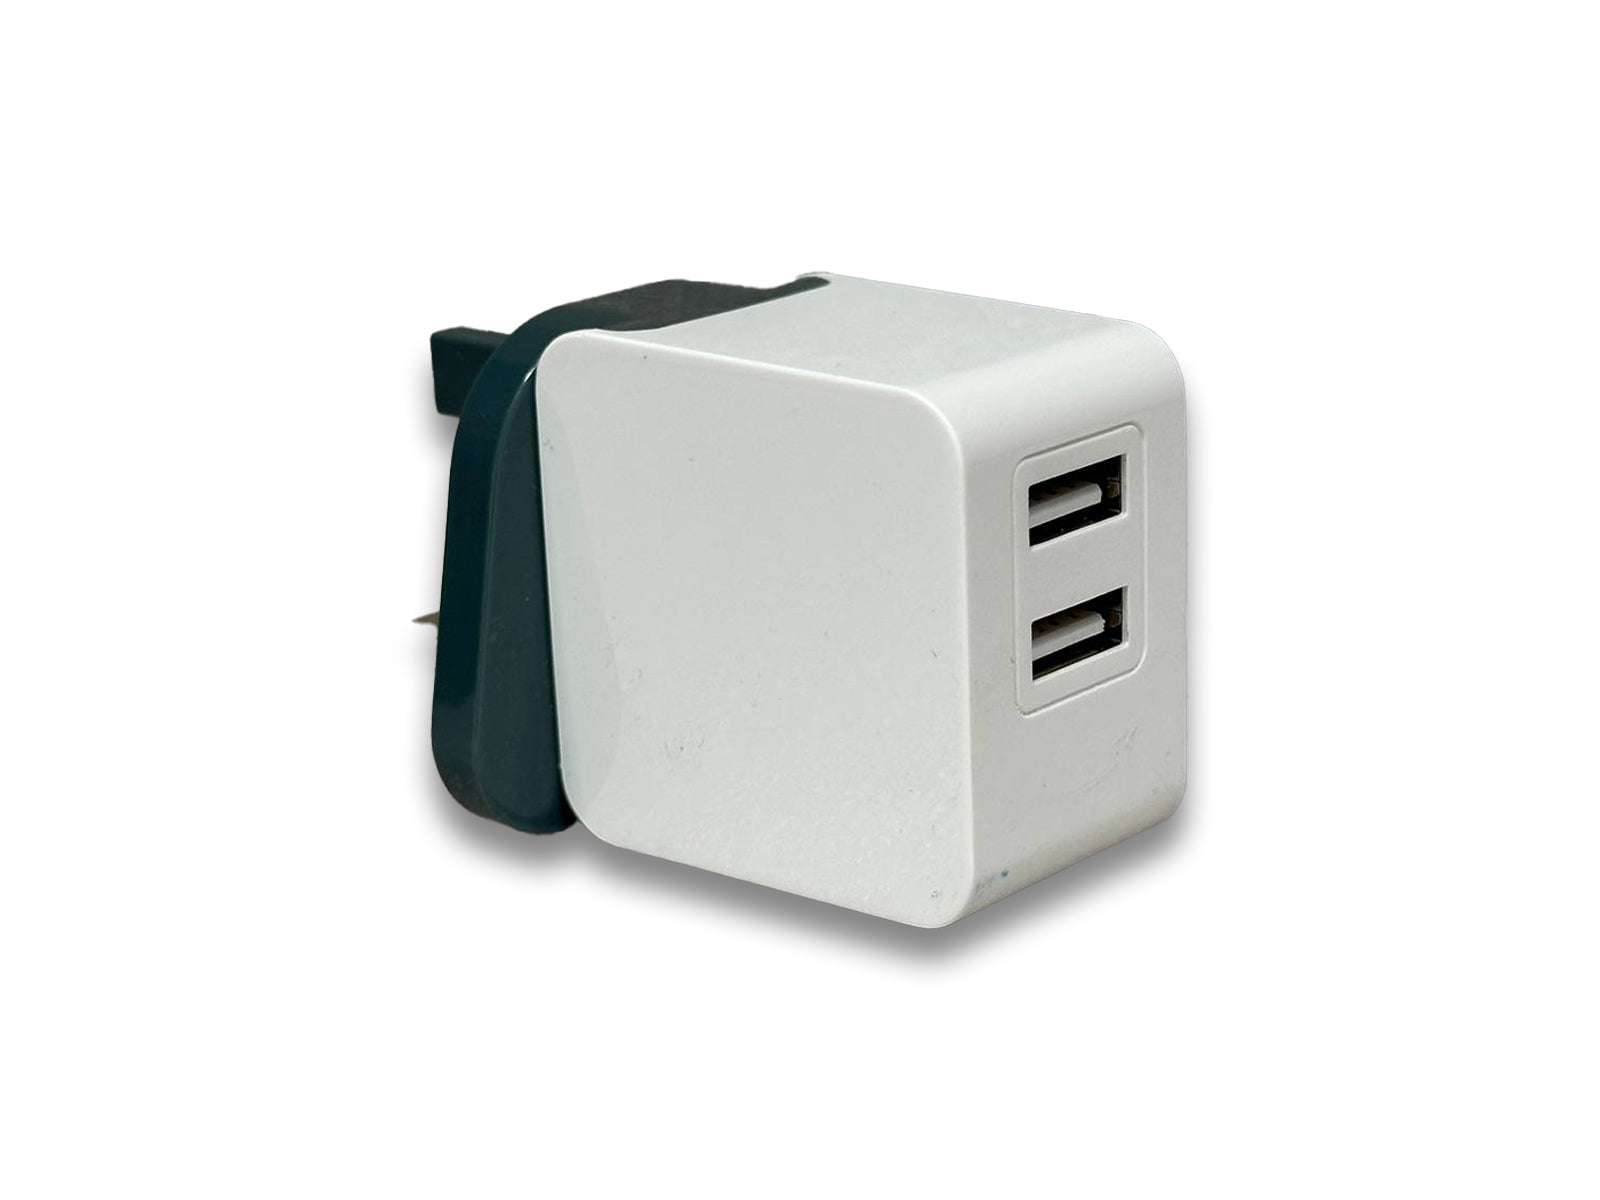 Image shows angled back view of wall charger on white background